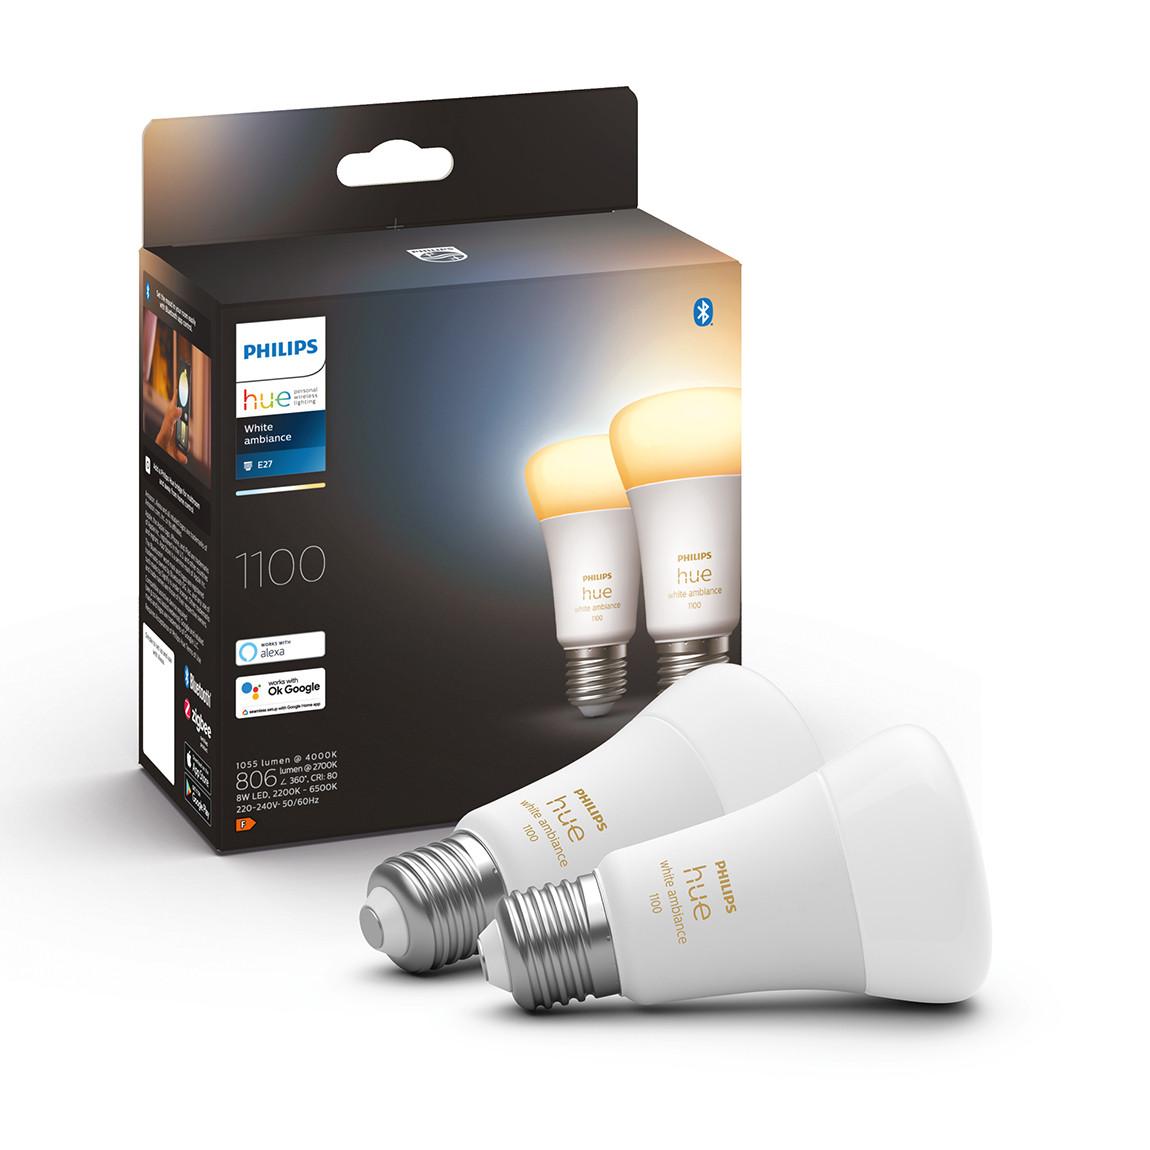 Philips Hue White Ambiance E27 Doppelpack 1100 mit Verpackung